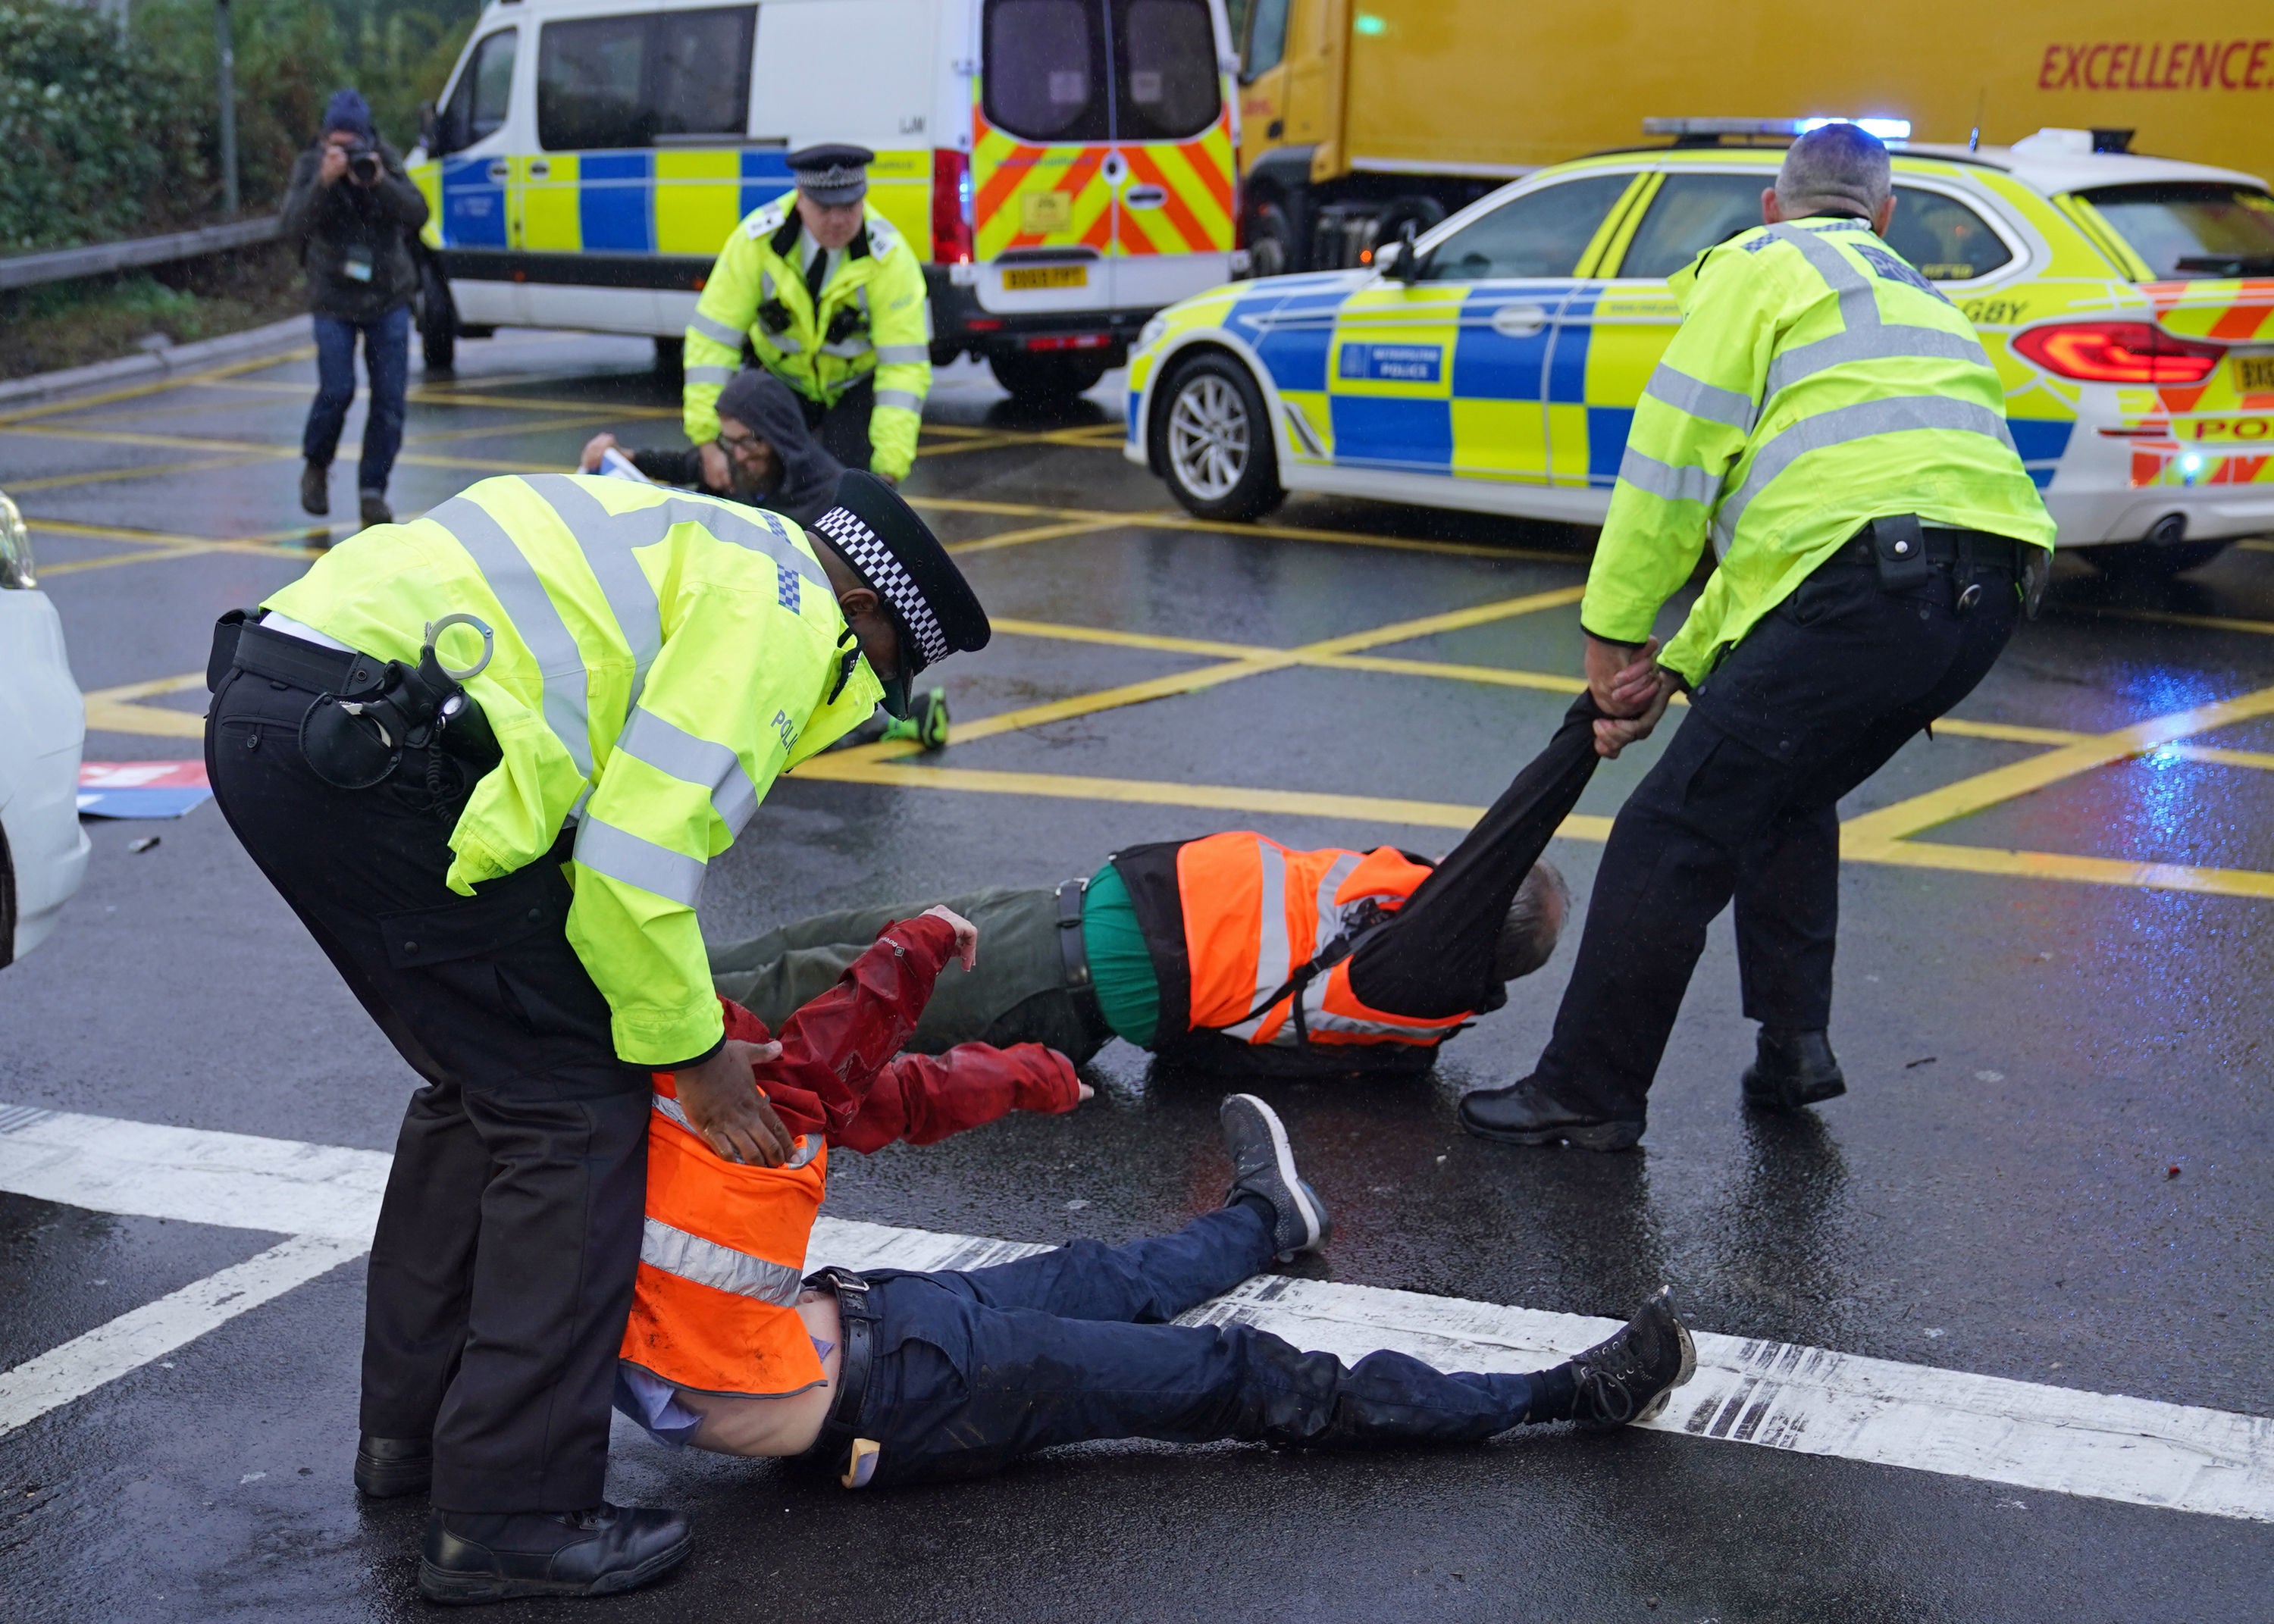 Police detain Insulate Britain protesters on 27 September, 2021.